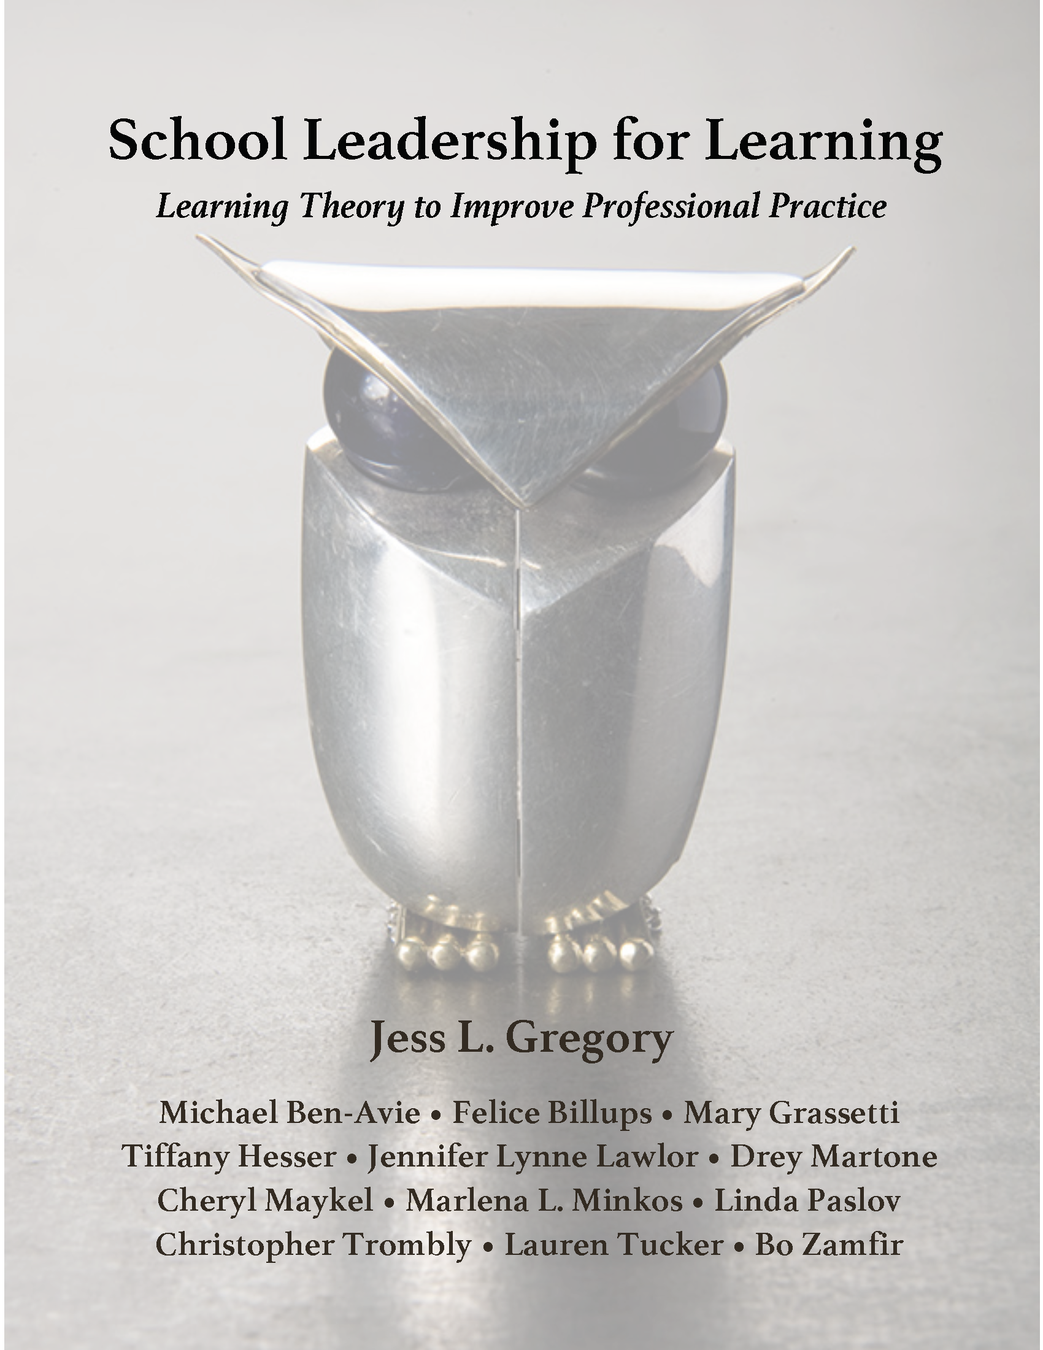 School Leadership for Learning: Learning Theory to Improve Professional Practice cover photo